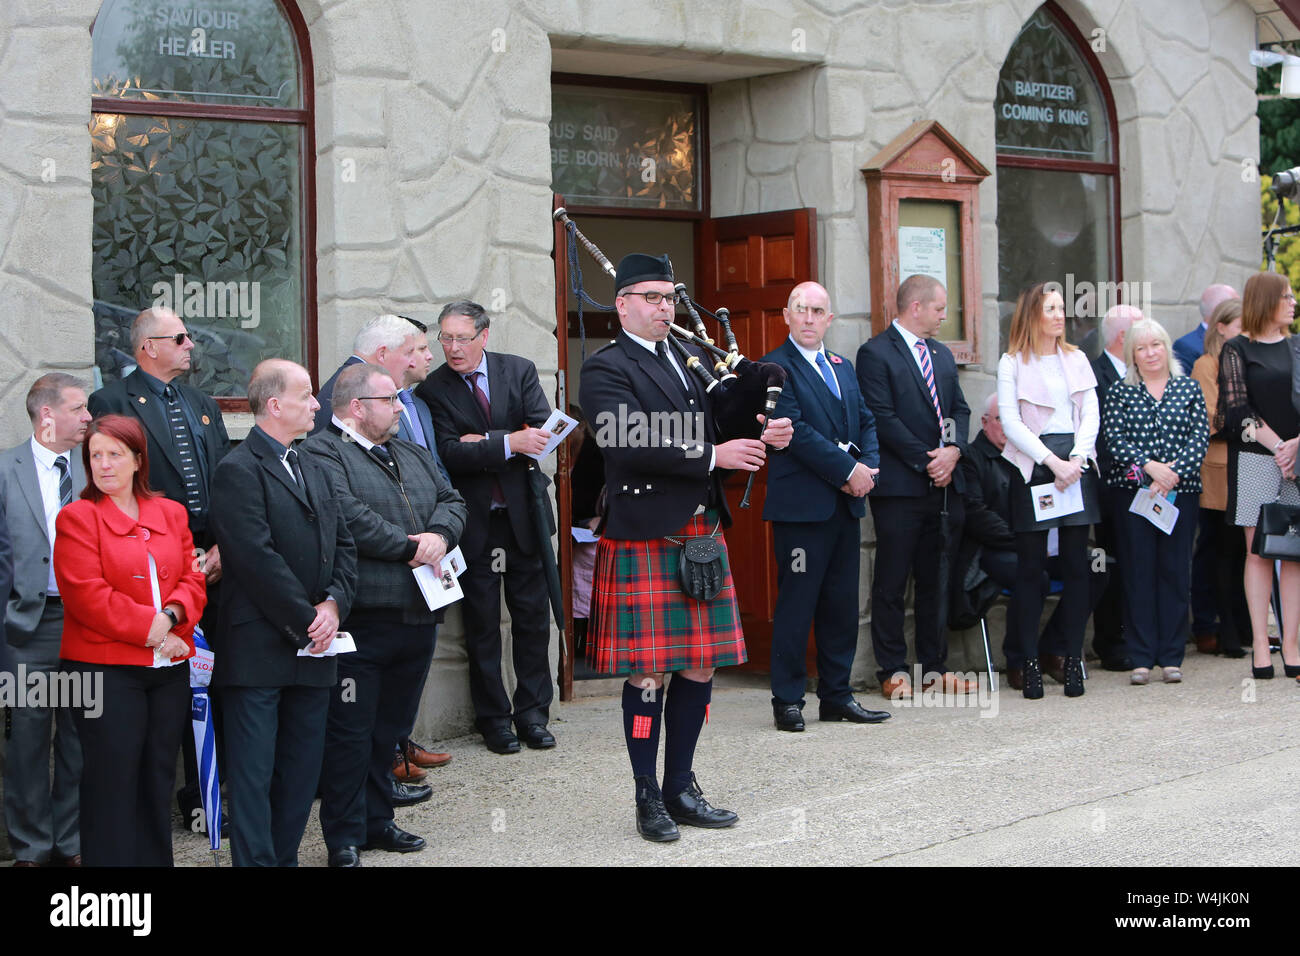 A single piper plays at the Funeral of Willie Frazer outside Five Mile Hill Full Gospel Fellowship Church on the Maytown Road, County Armagh, Monday July 1st, 2019. (Photo by Paul McErlane for the Belfast Telegraph) Stock Photo